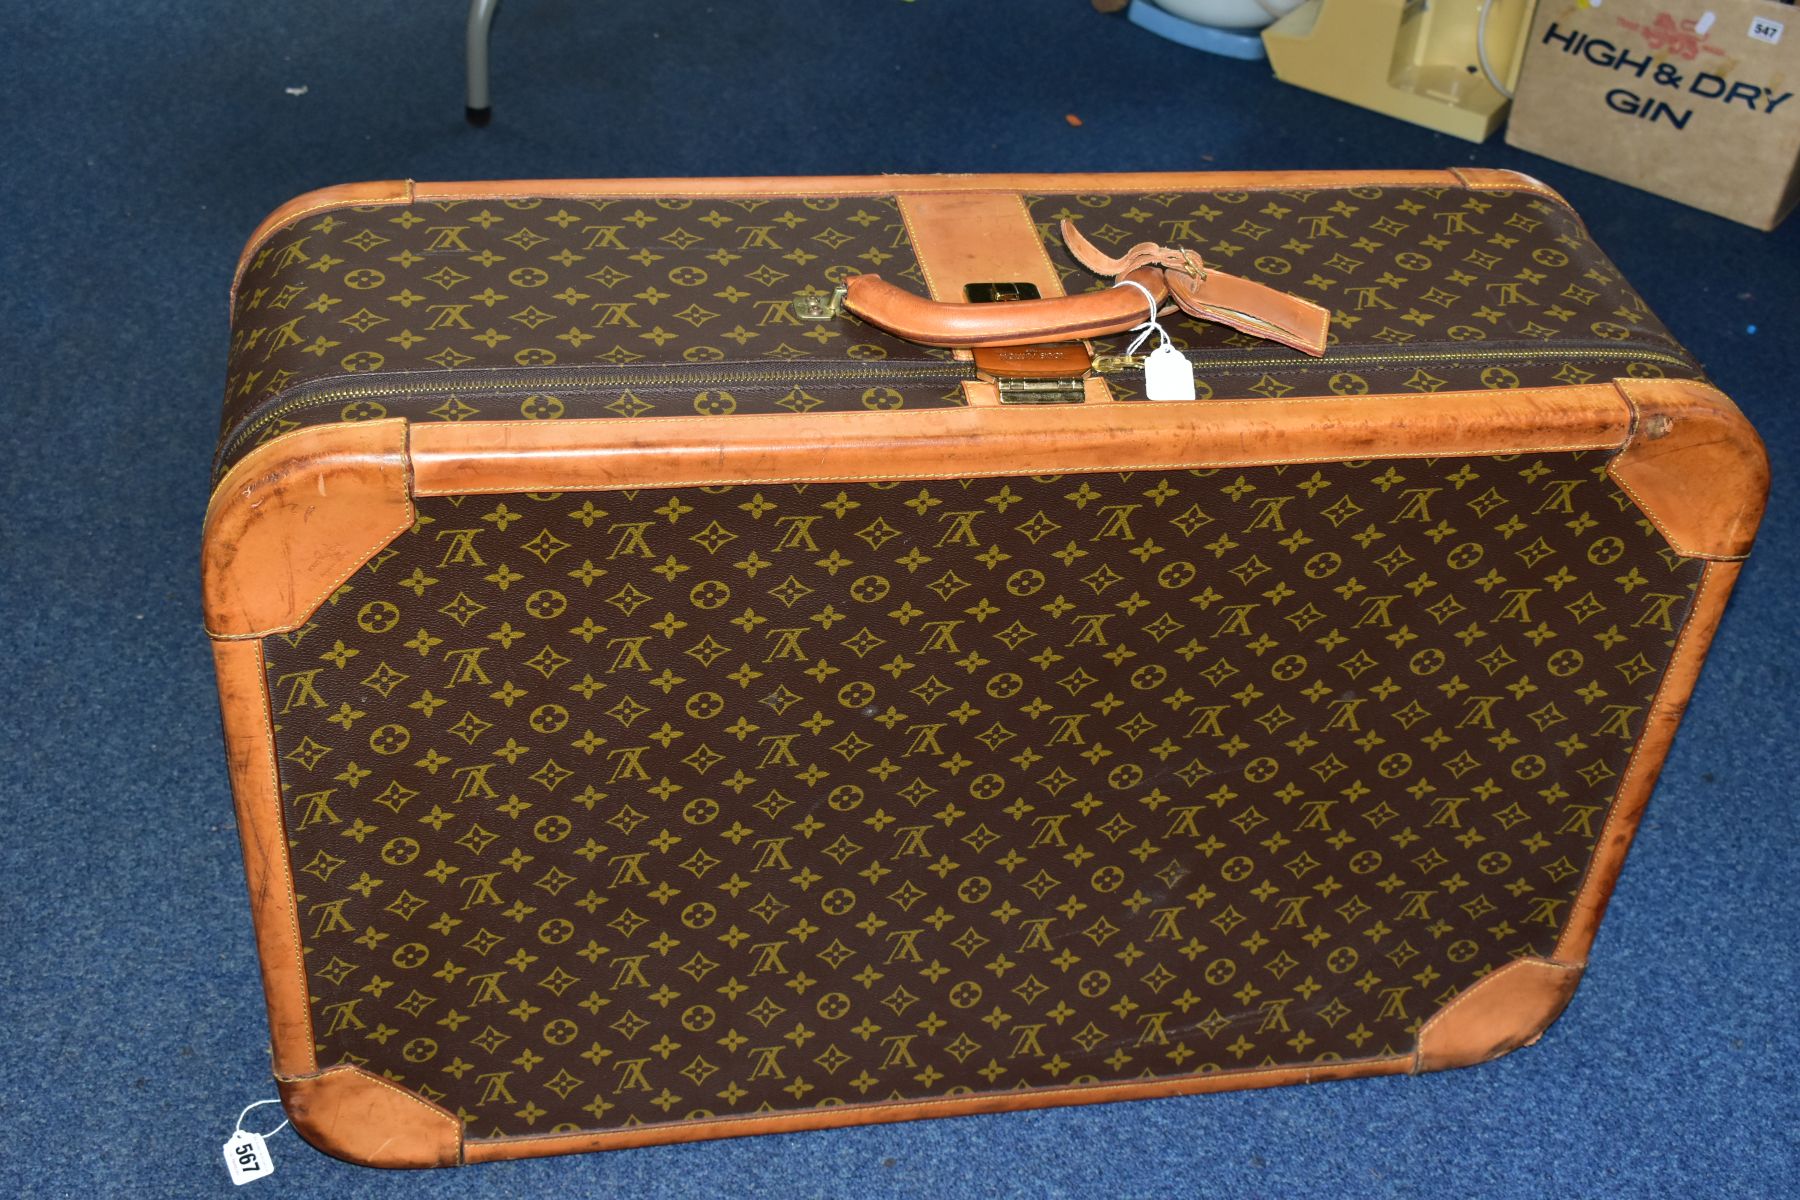 A LOUIS VUITTON MONOGRAM SUITCASE, tan leather trim, with a combination lock (locked, combination